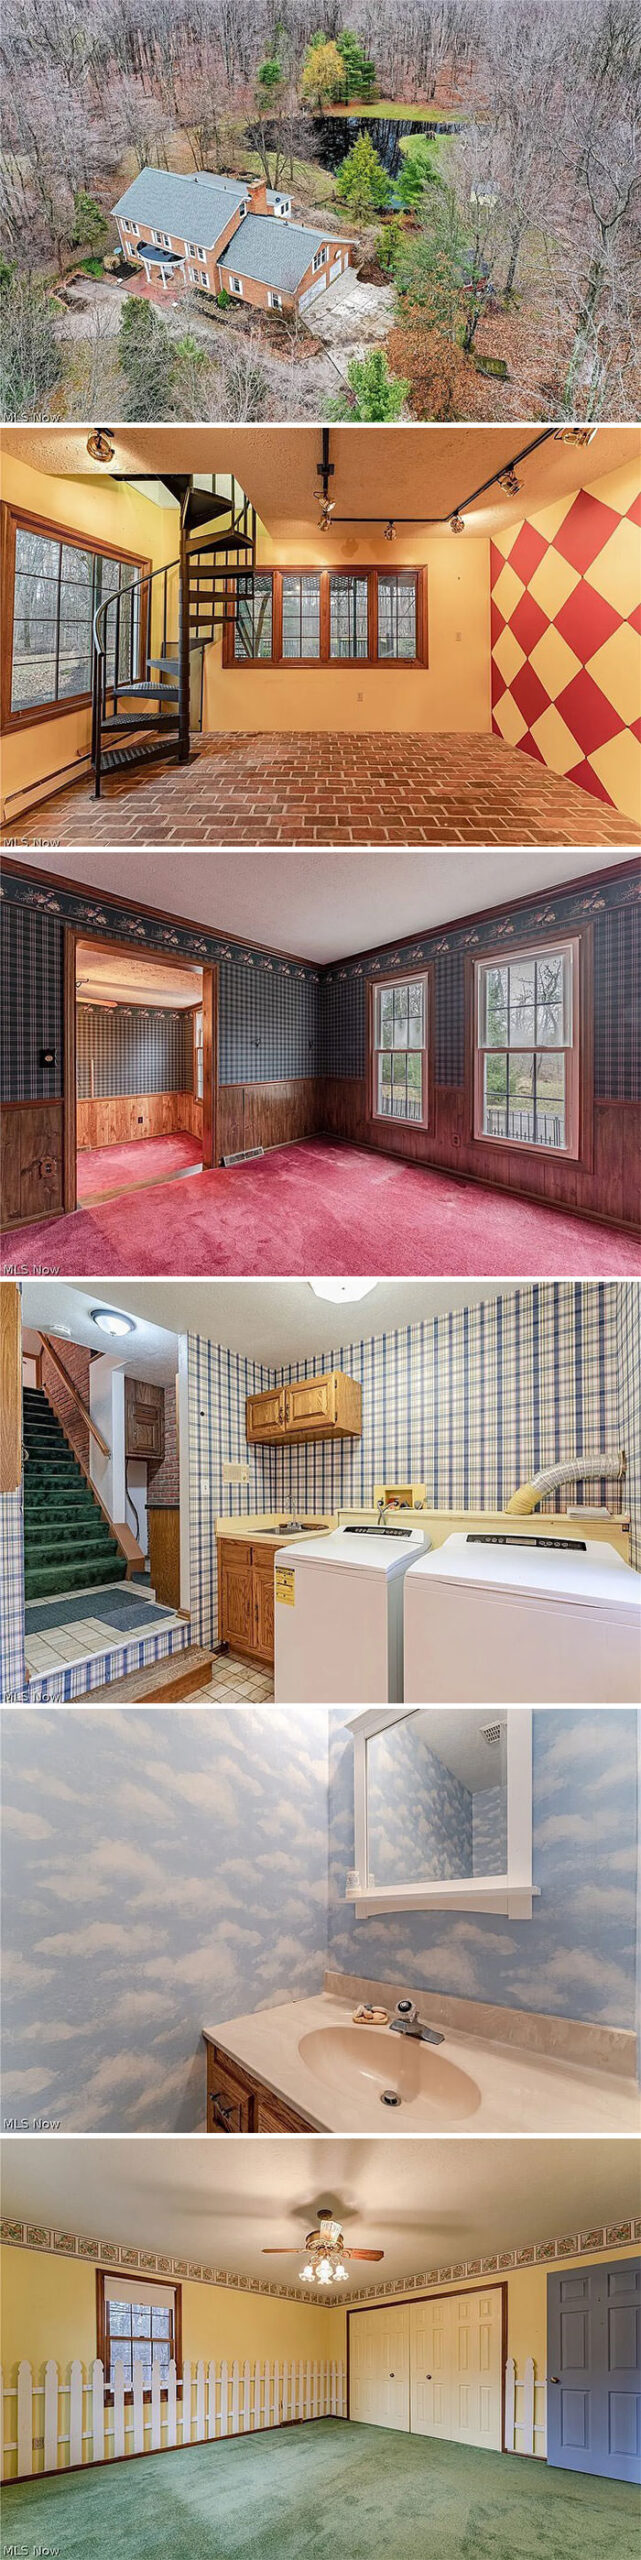 This house has a personality disorder because every room is different from the others.